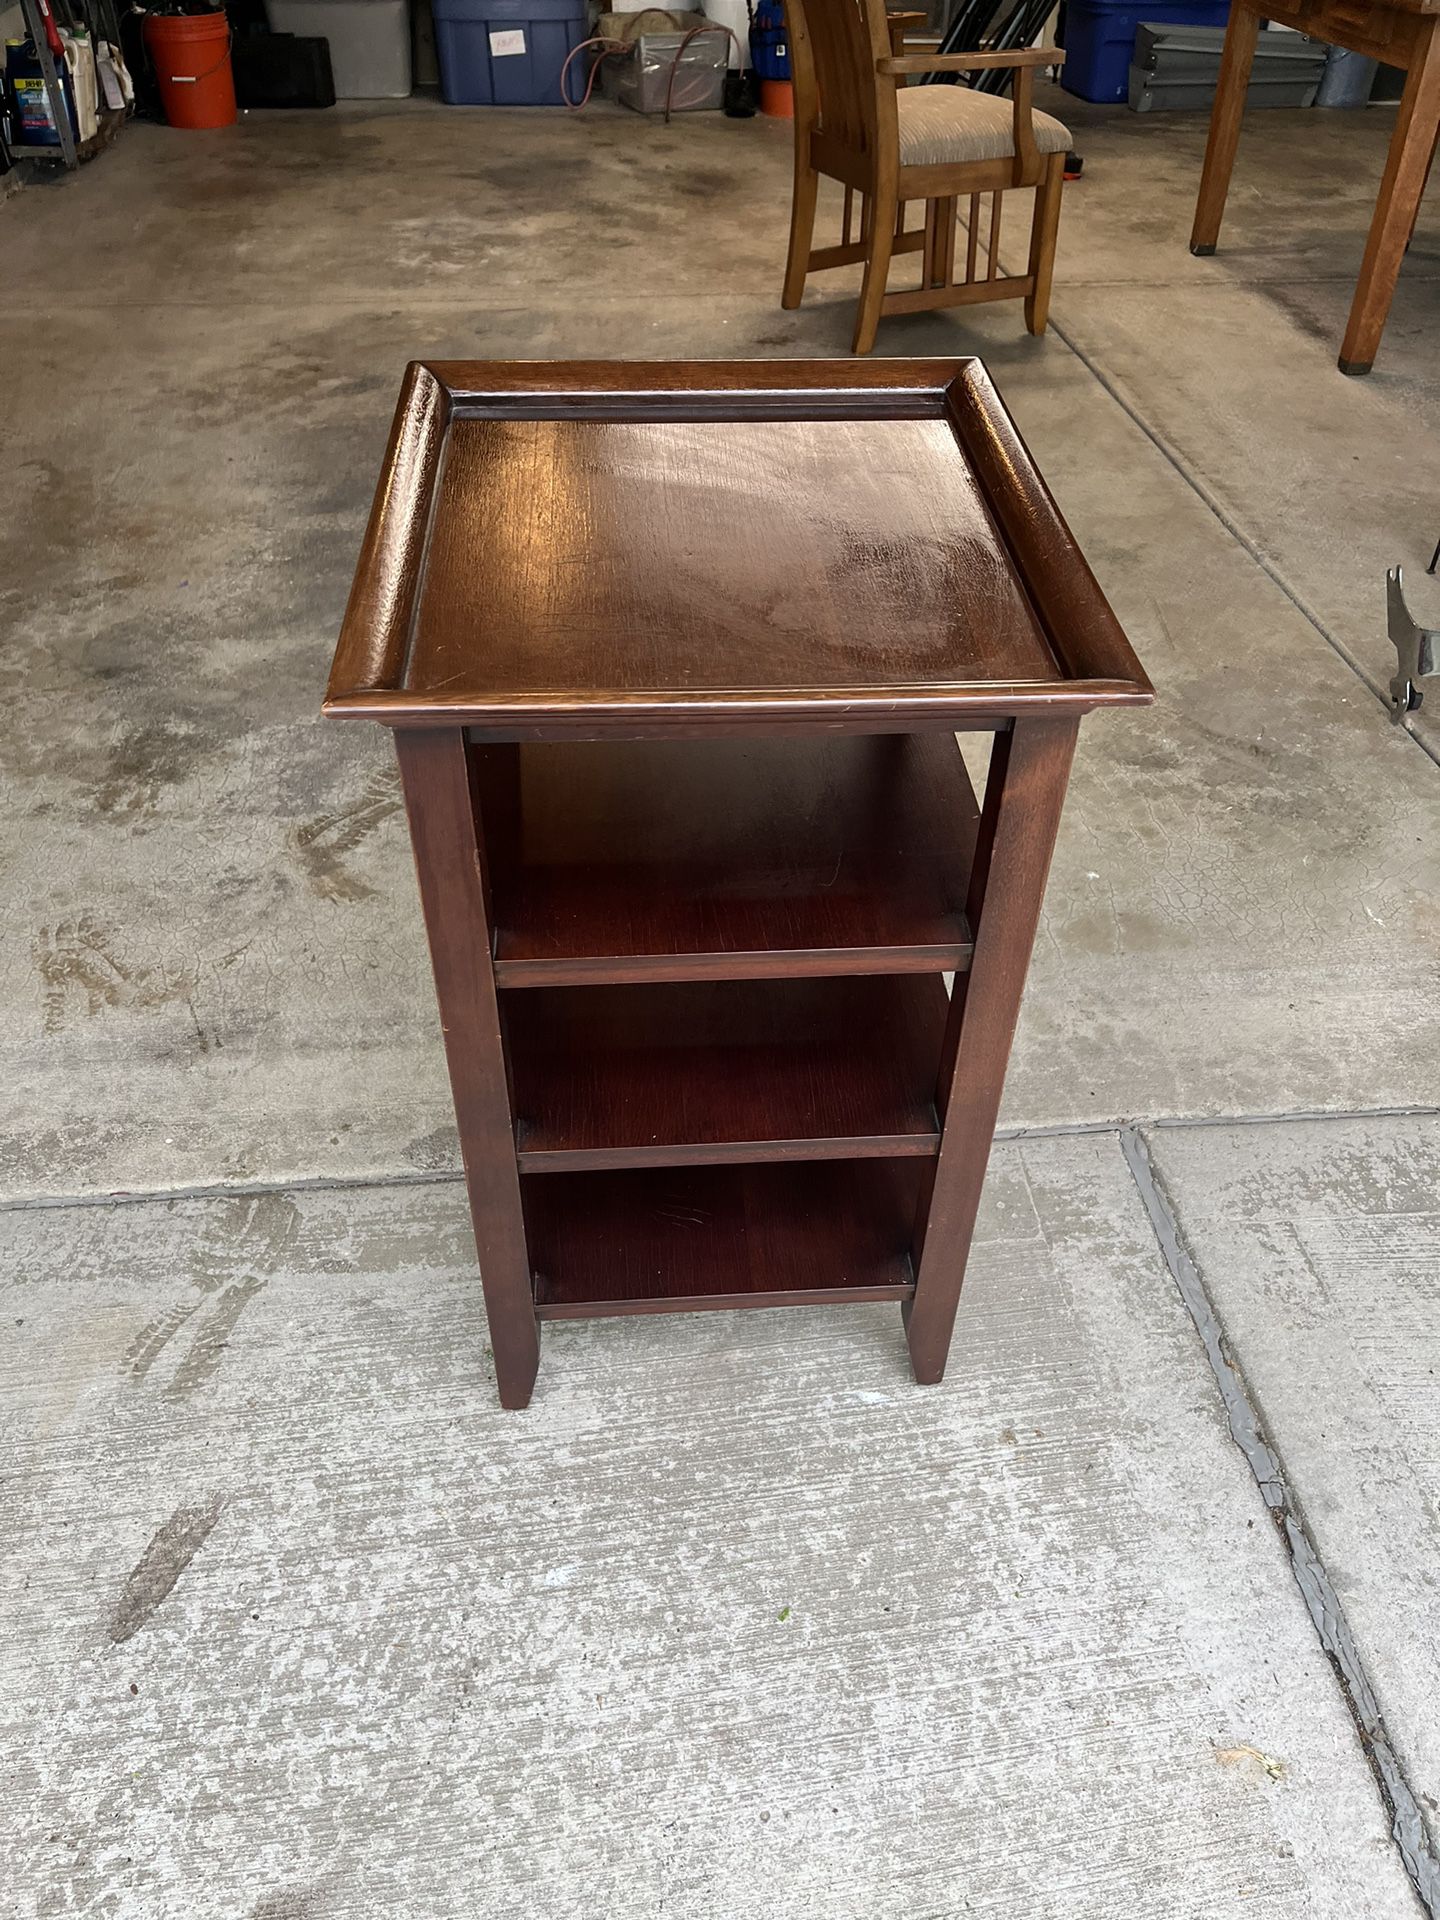 Four tiered end table, side table